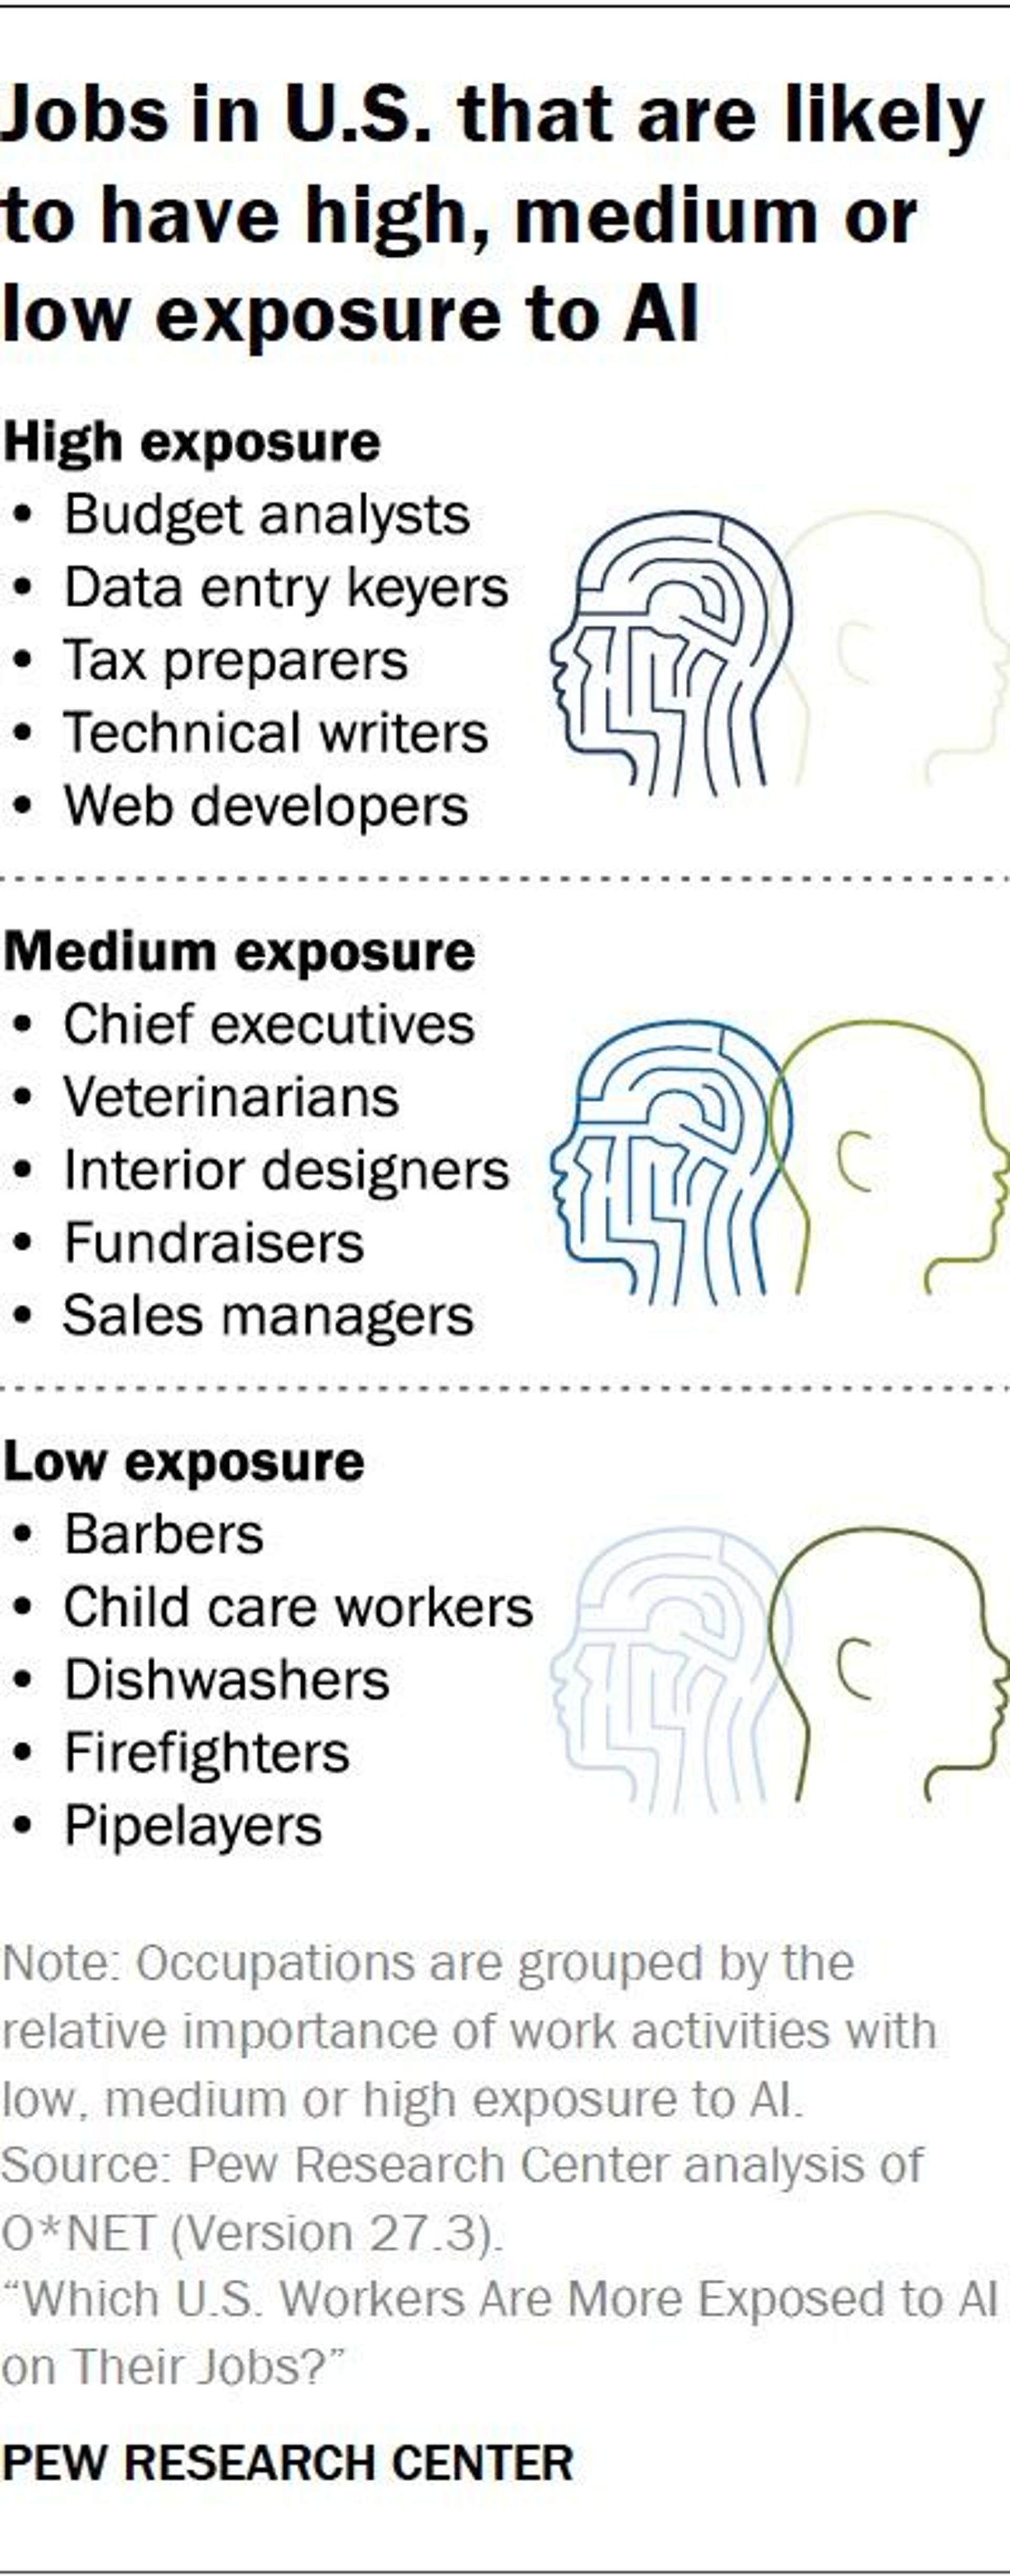 Pew Research Center chart showing which jobs in the U.S. are likely to have high, medium or low exposure to AI.